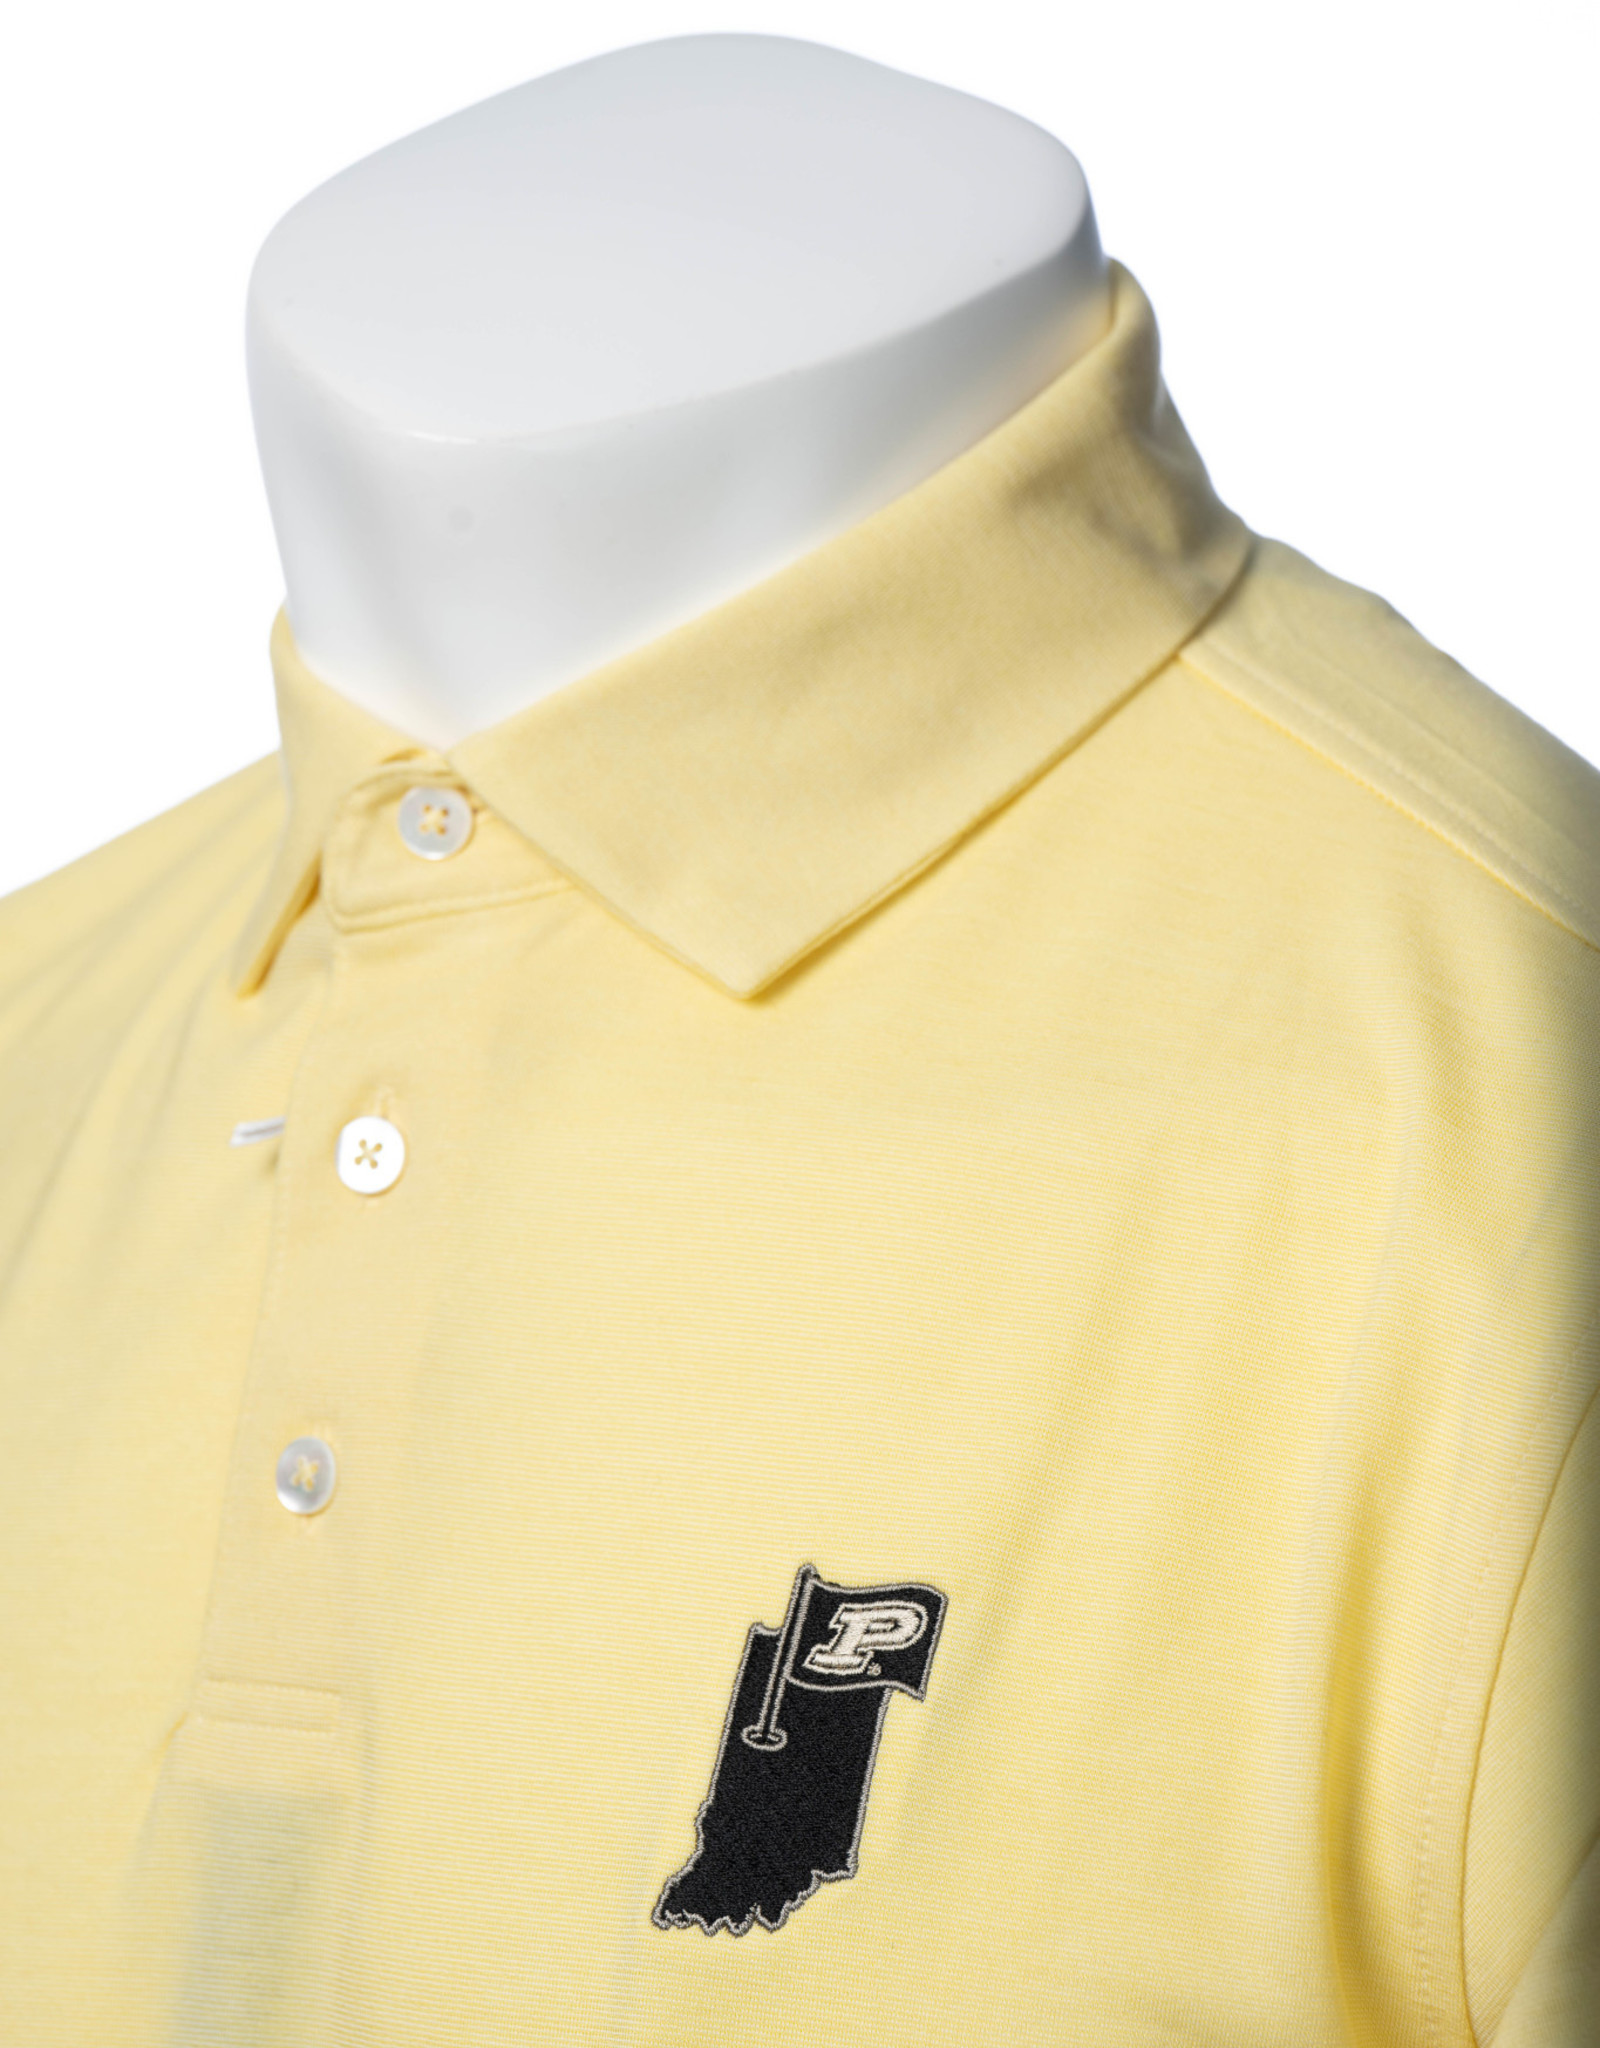 PURDUE COLLECTION PURDUE COLLECTION BUTTER STRIPE POLO